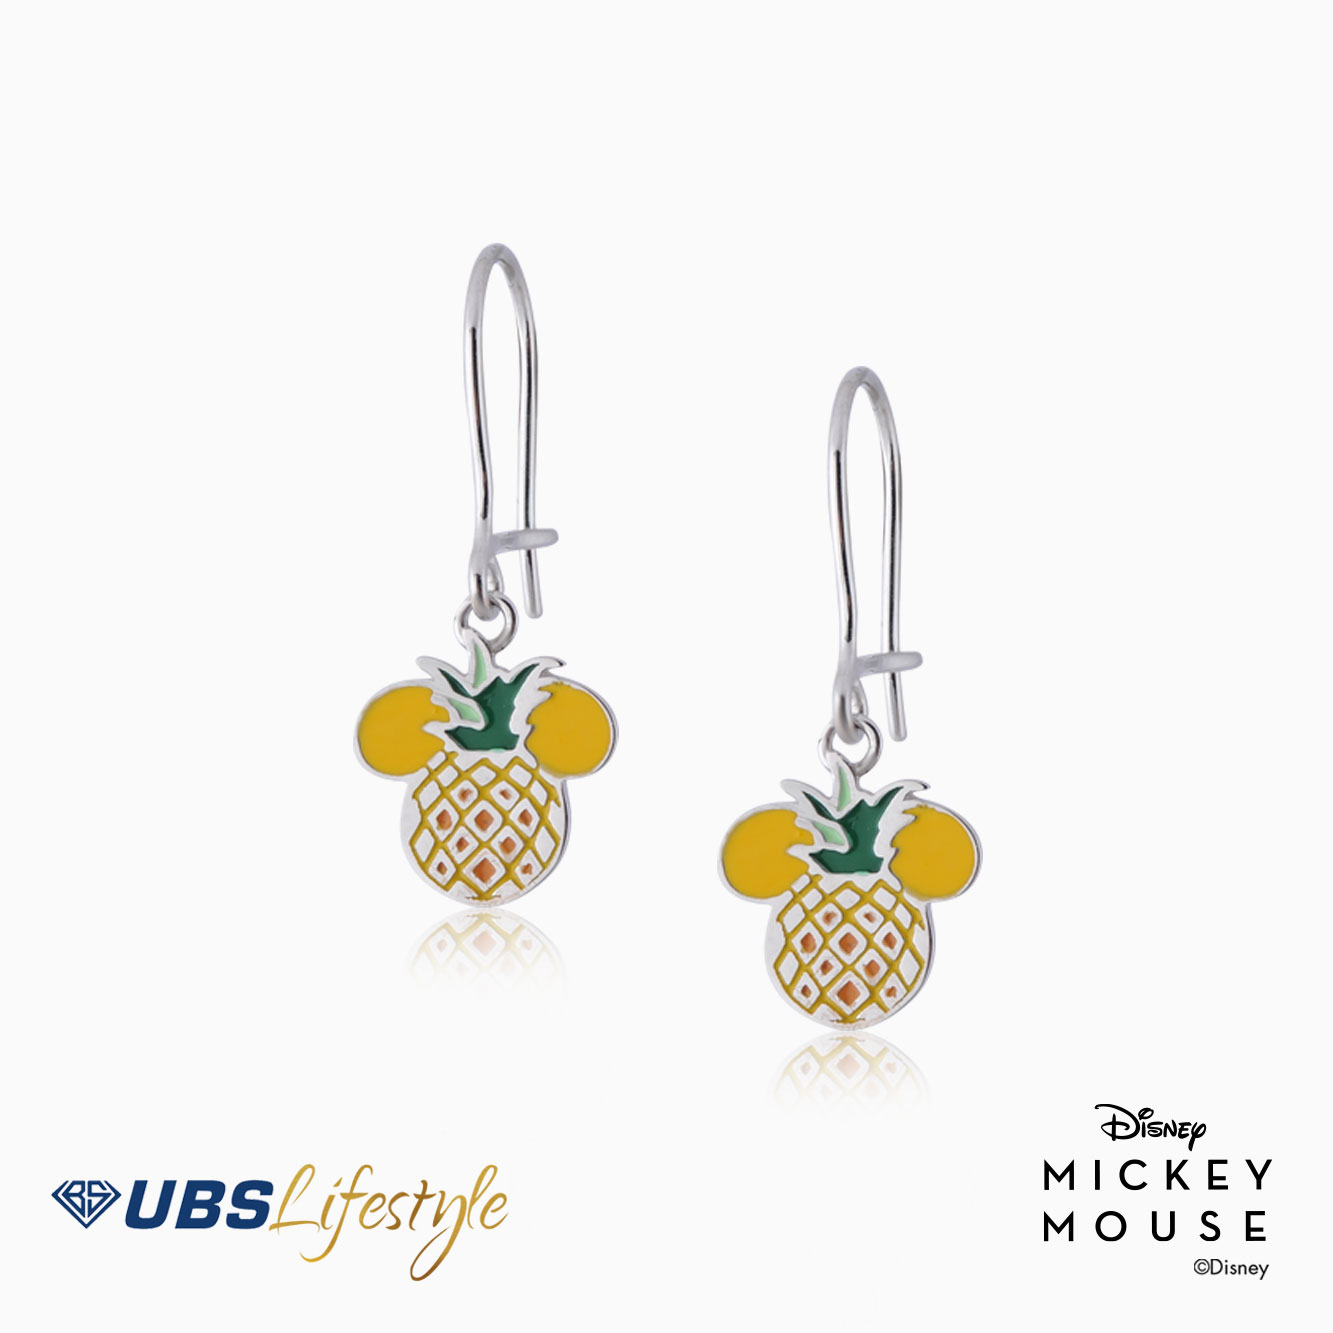 UBS Anting Emas Disney Mickey Mouse - Aay0052 - 17K